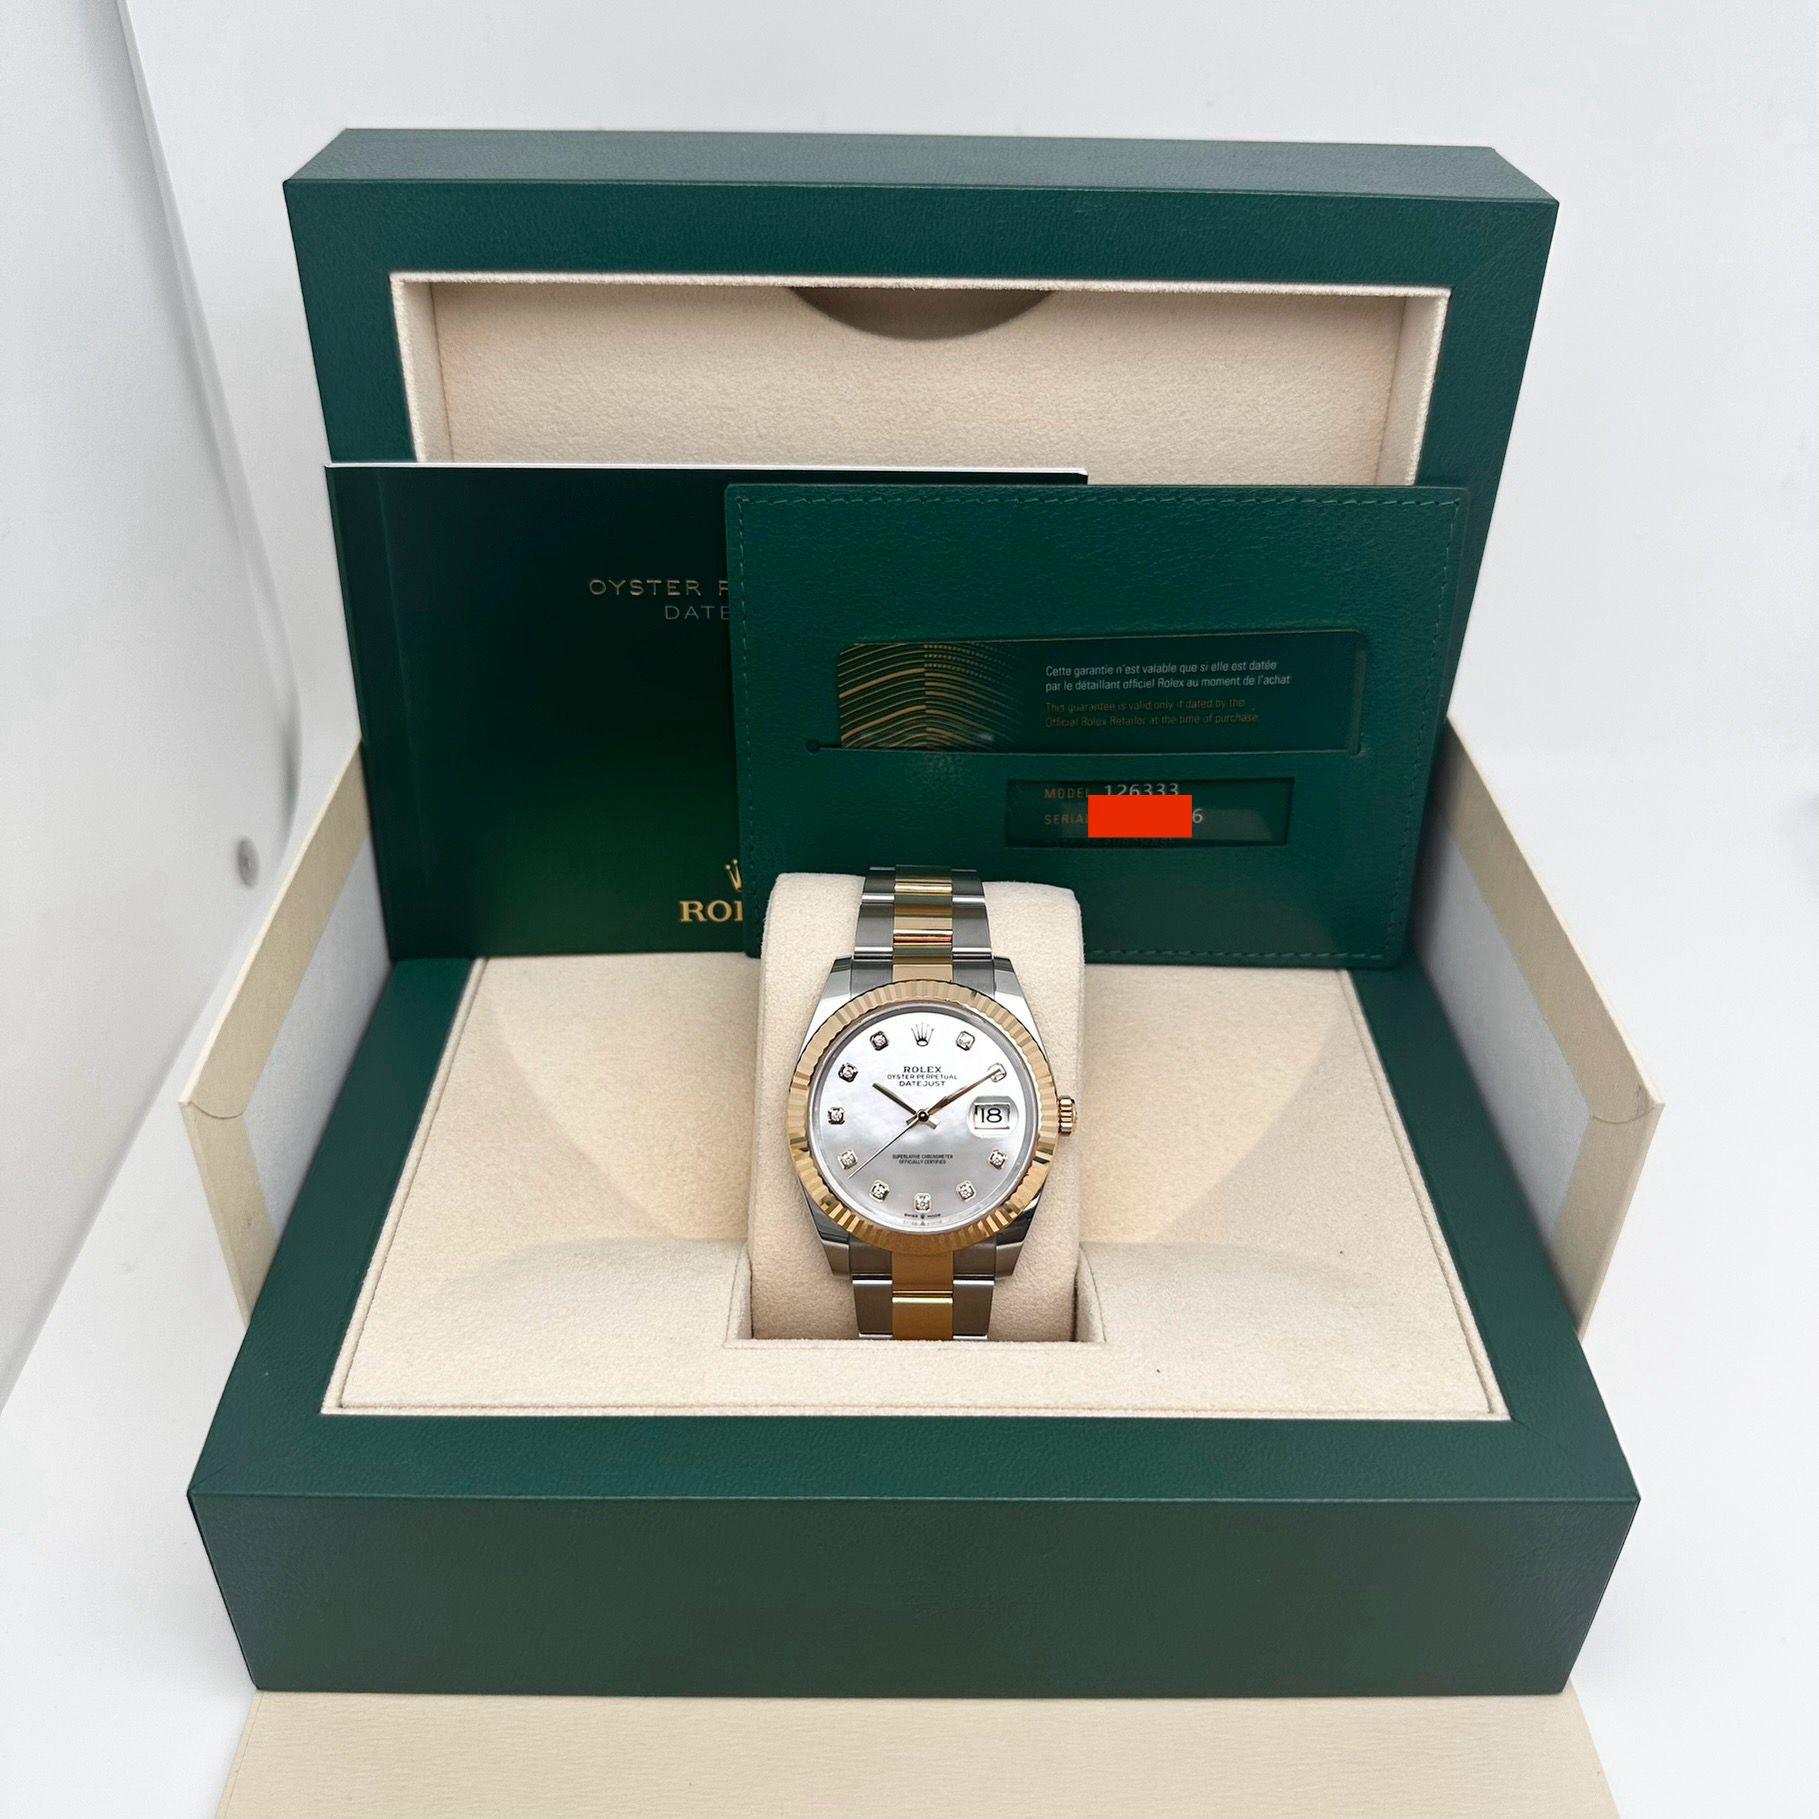 New. Comes with the original box and papers. 5-year Rolex Warranty.

* Free Shipping within the USA
* Five-year warranty coverage
* 14-day return policy with a full refund. Buyers can verify the watch's authenticity at any boutique or dealership